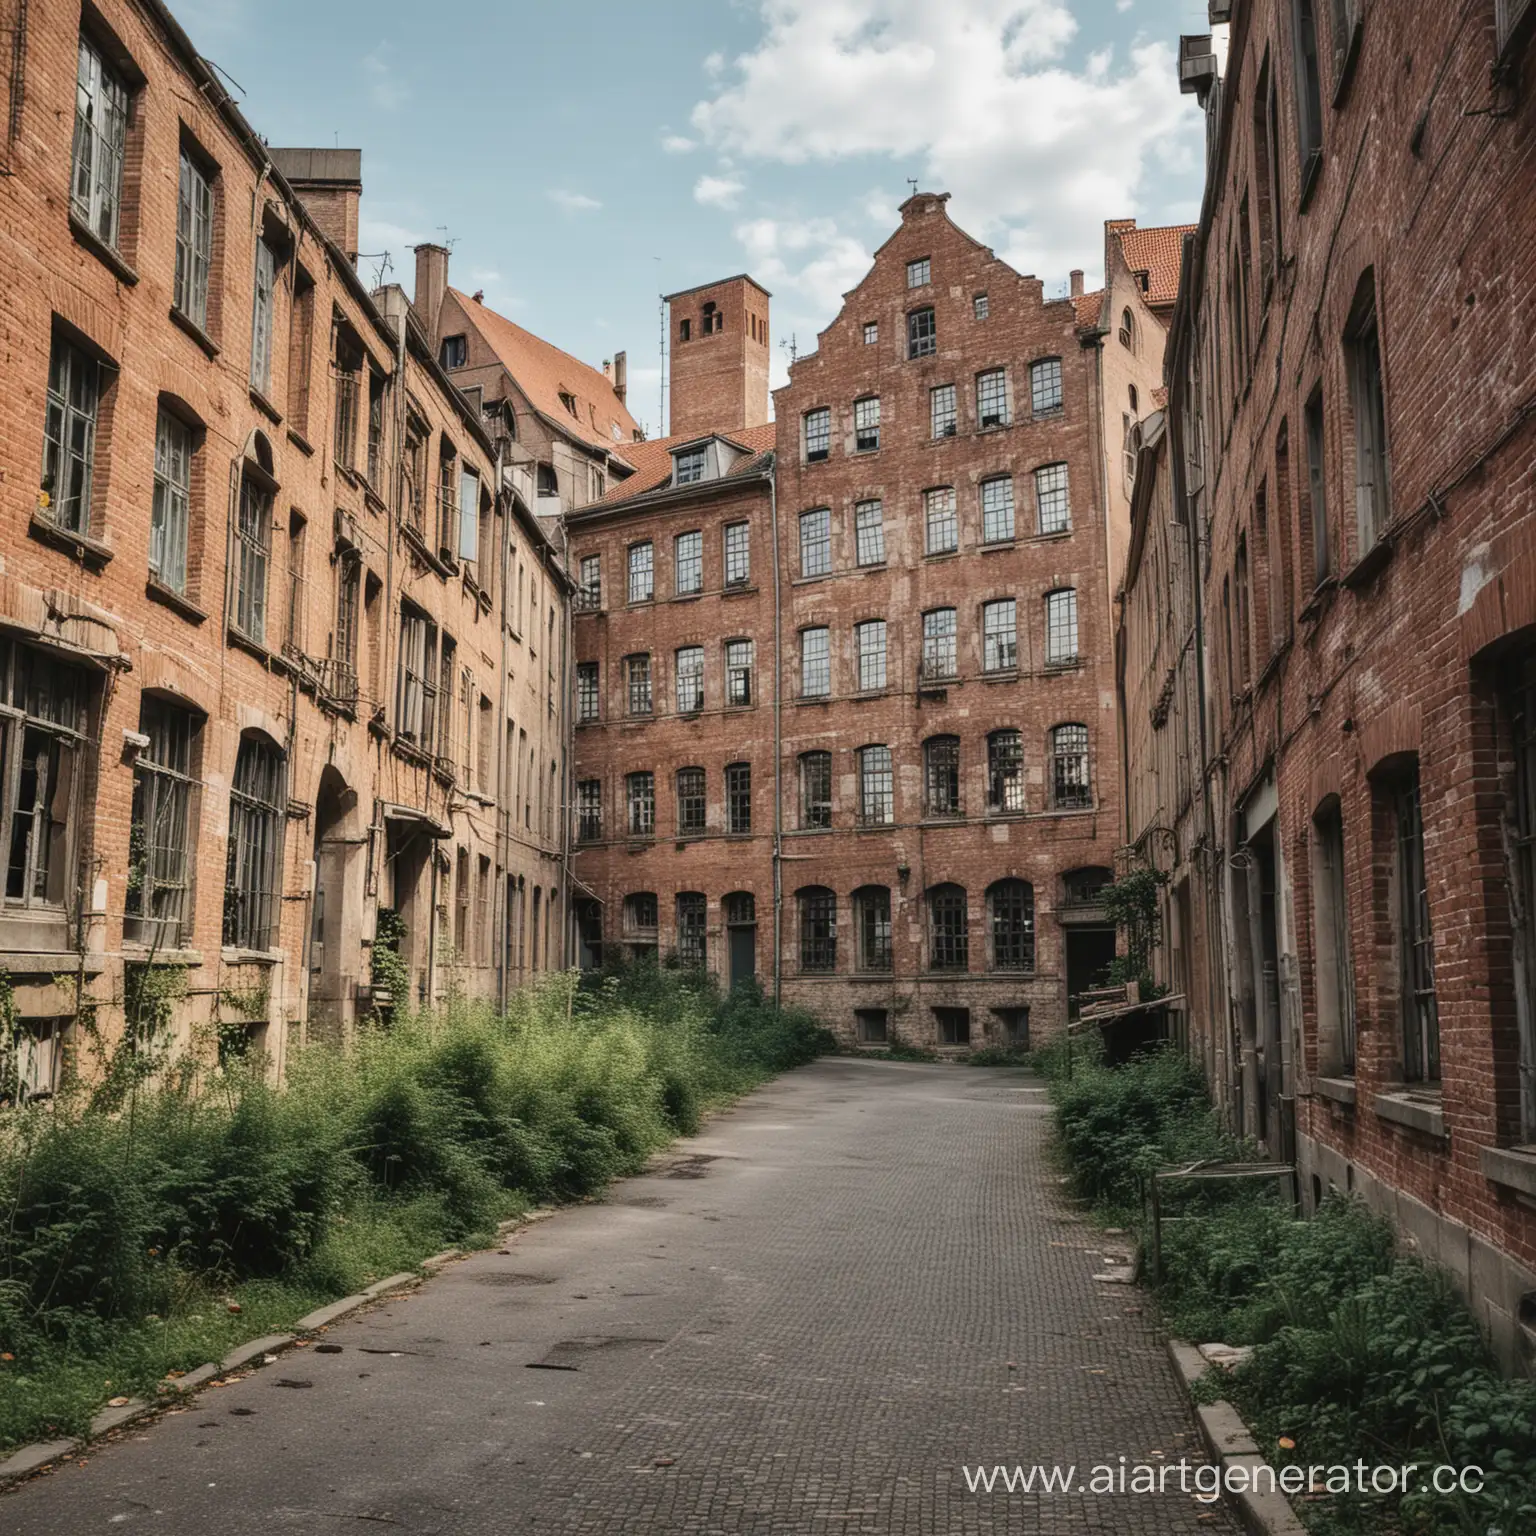 Decaying-Monuments-and-Industrial-Ruins-in-Historic-German-City